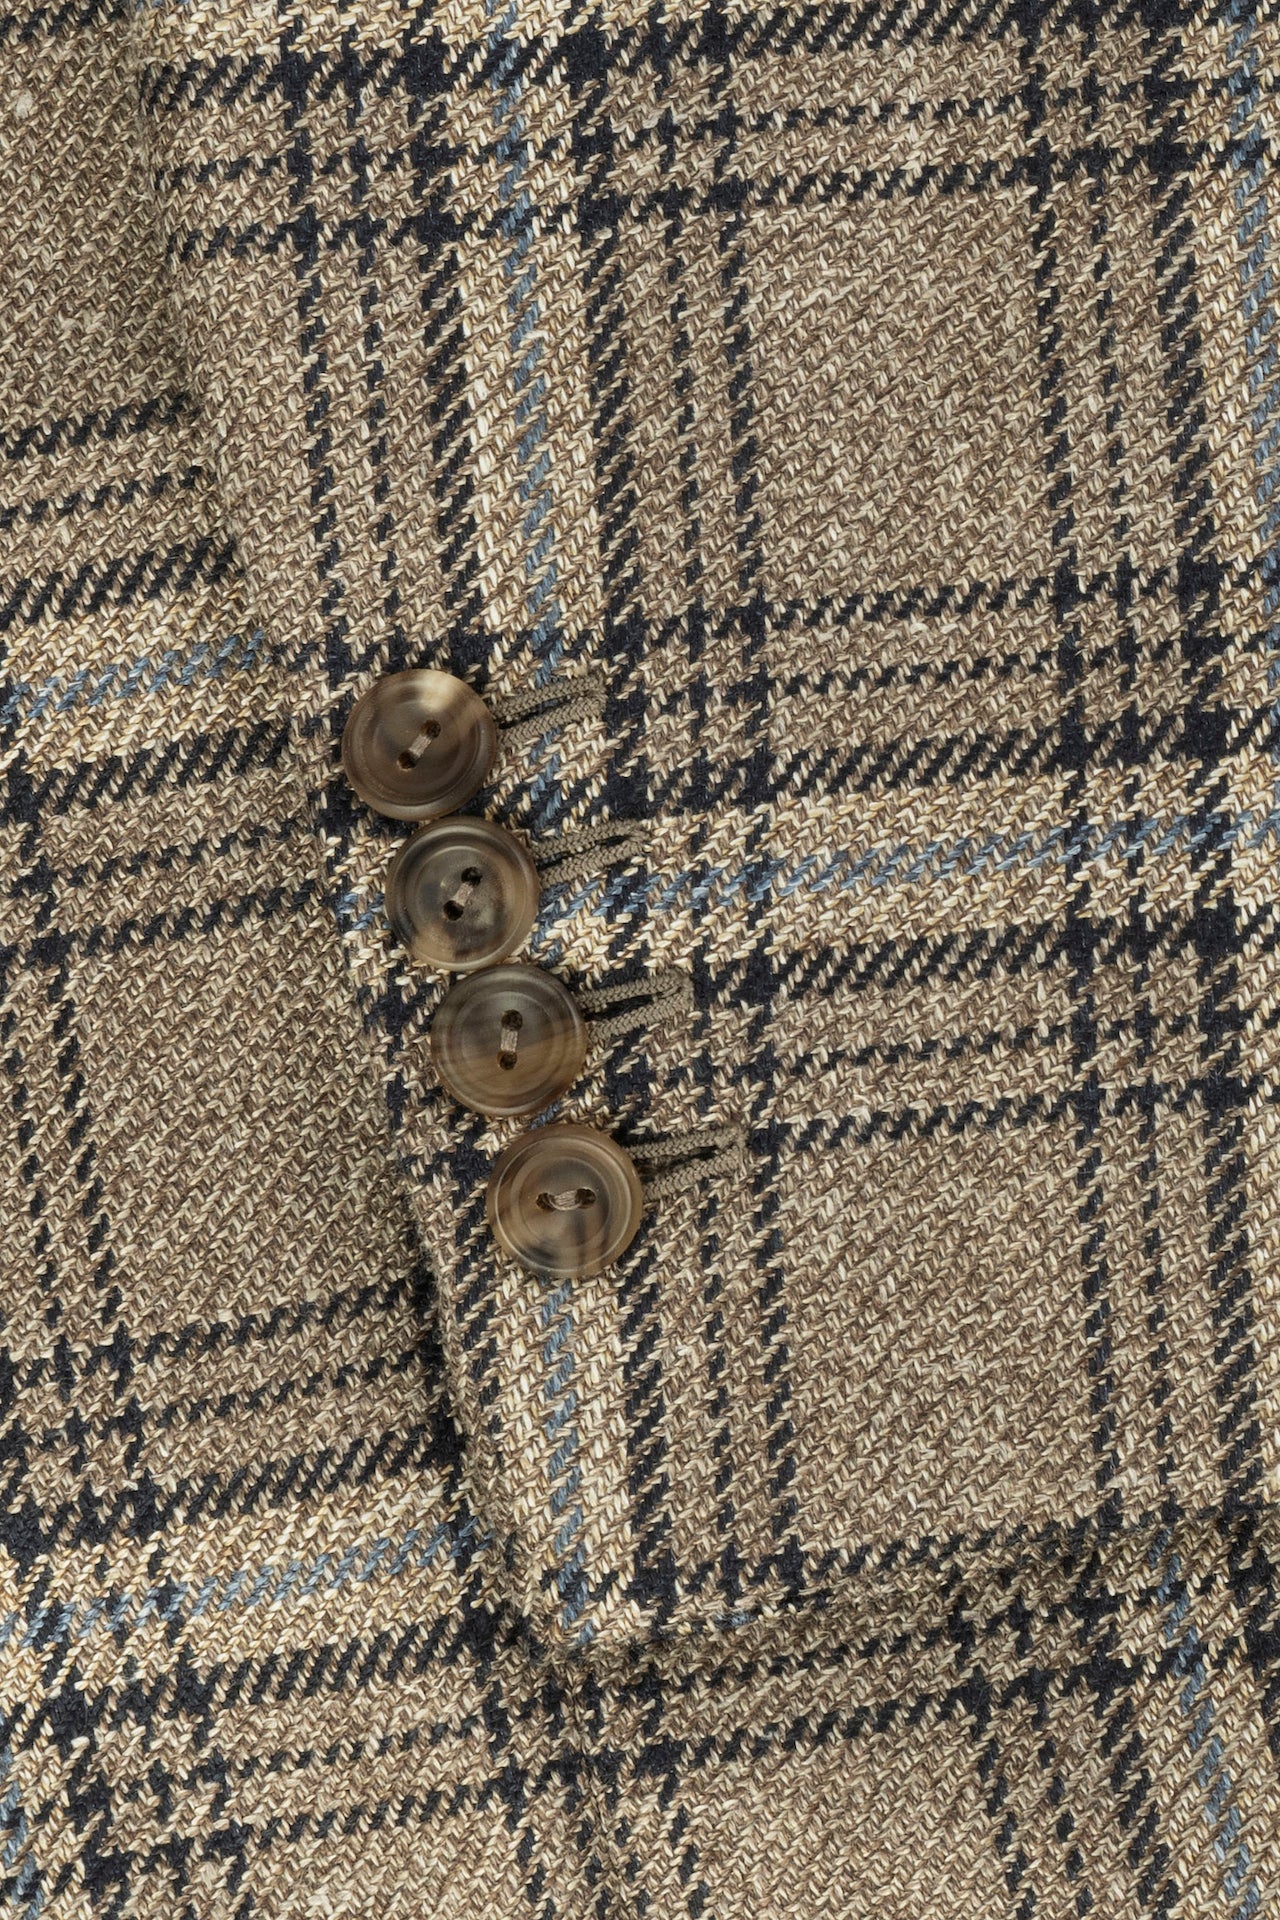 Brown/Blue Wool Silk and Linen Overcheck Single Breasted Jacket